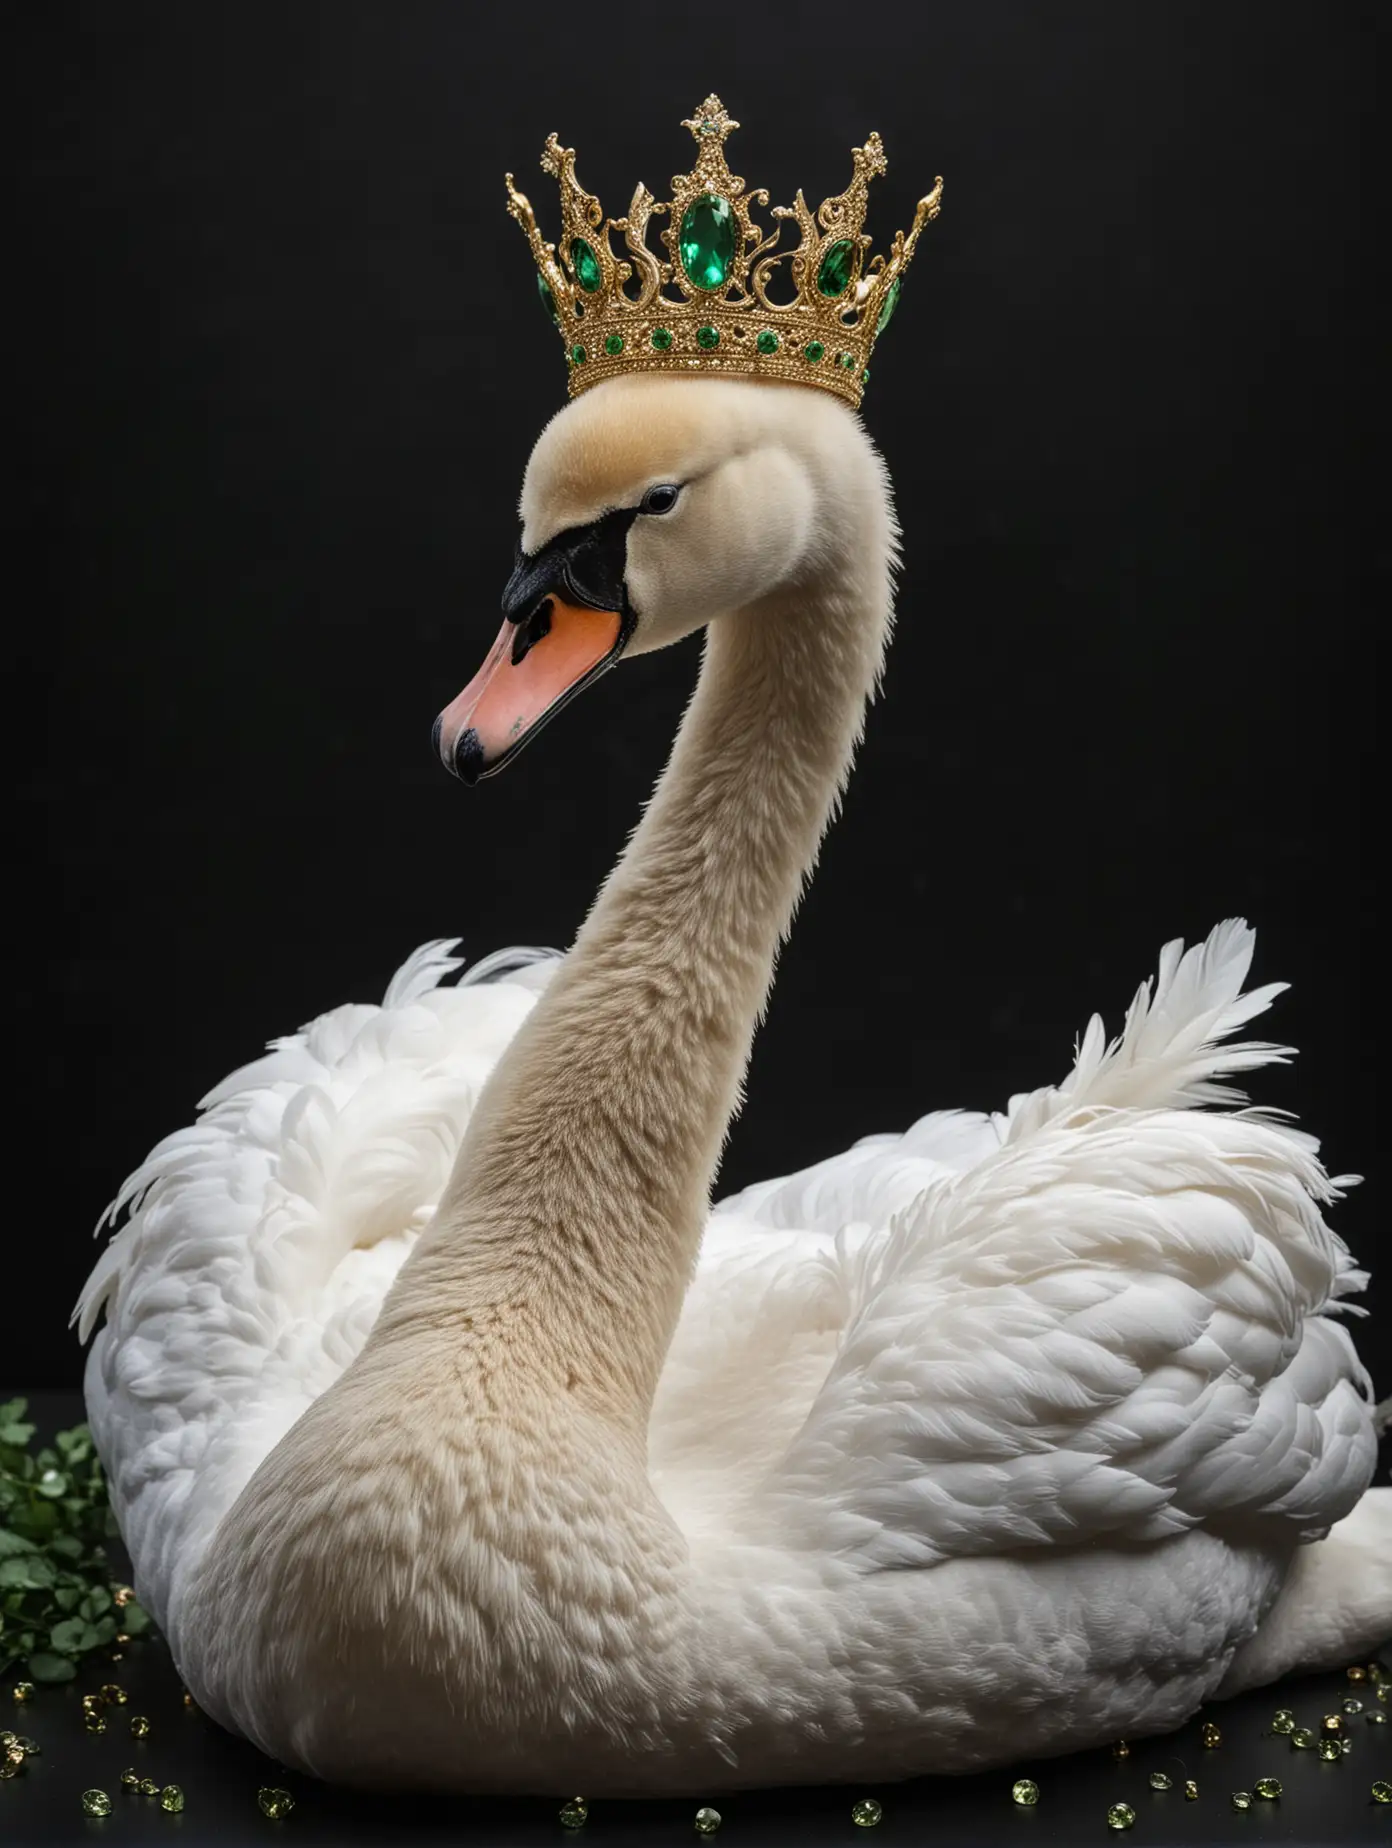 White swan with gold crown and green jewels, black backround